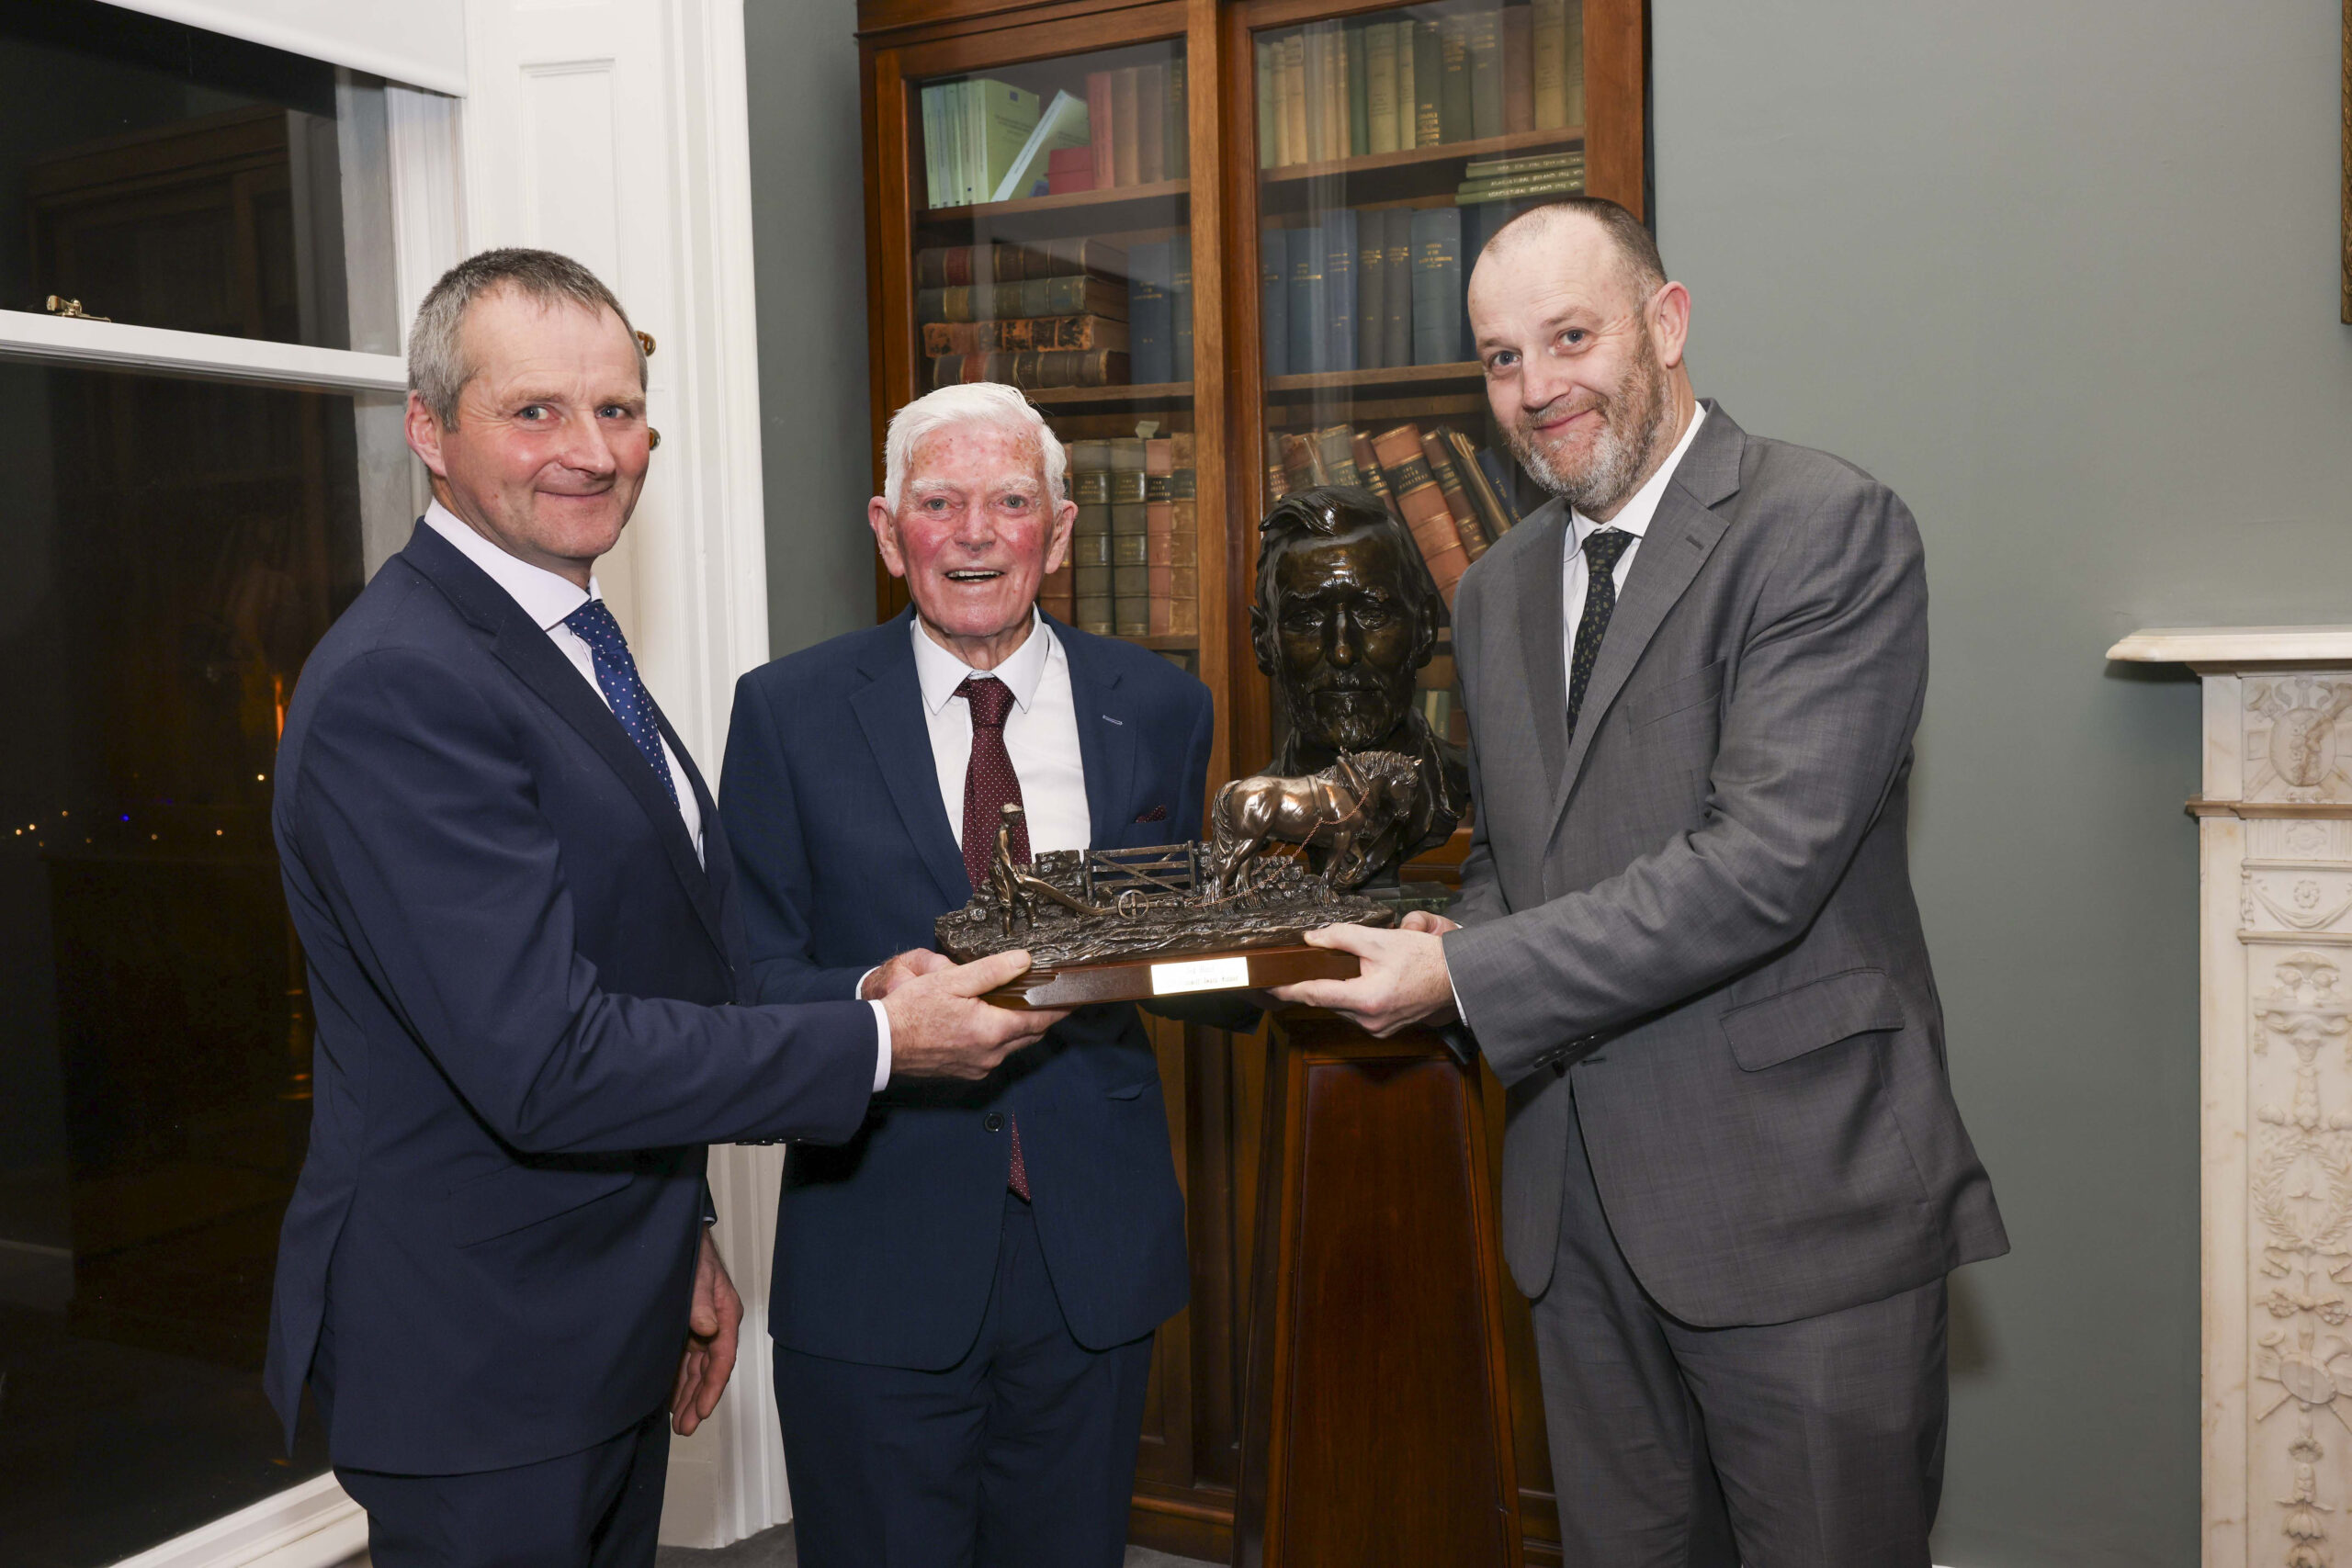 Ted Hunt receives the Plunkett Award from Edward Carr, President of the Irish Co-operative Organisation Society (ICOS) and CEO TJ Flanagan (on right).